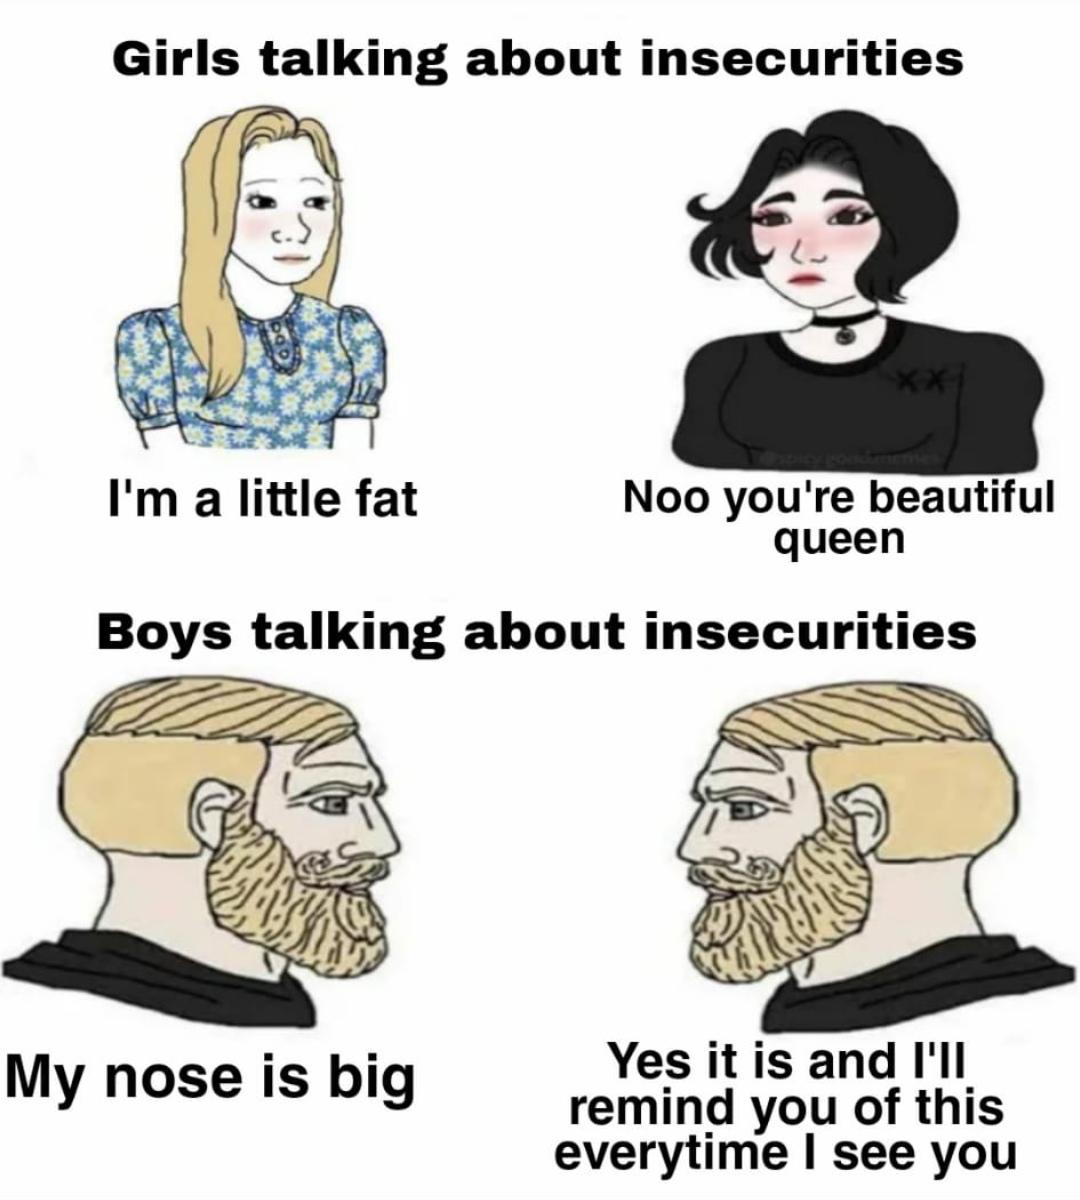 funny memes  - freddie mercury meme - Girls talking about insecurities I'm a little fat Noo you're beautiful queen Boys talking about insecurities My nose is big Yes it is and I'll remind you of this everytime I see you